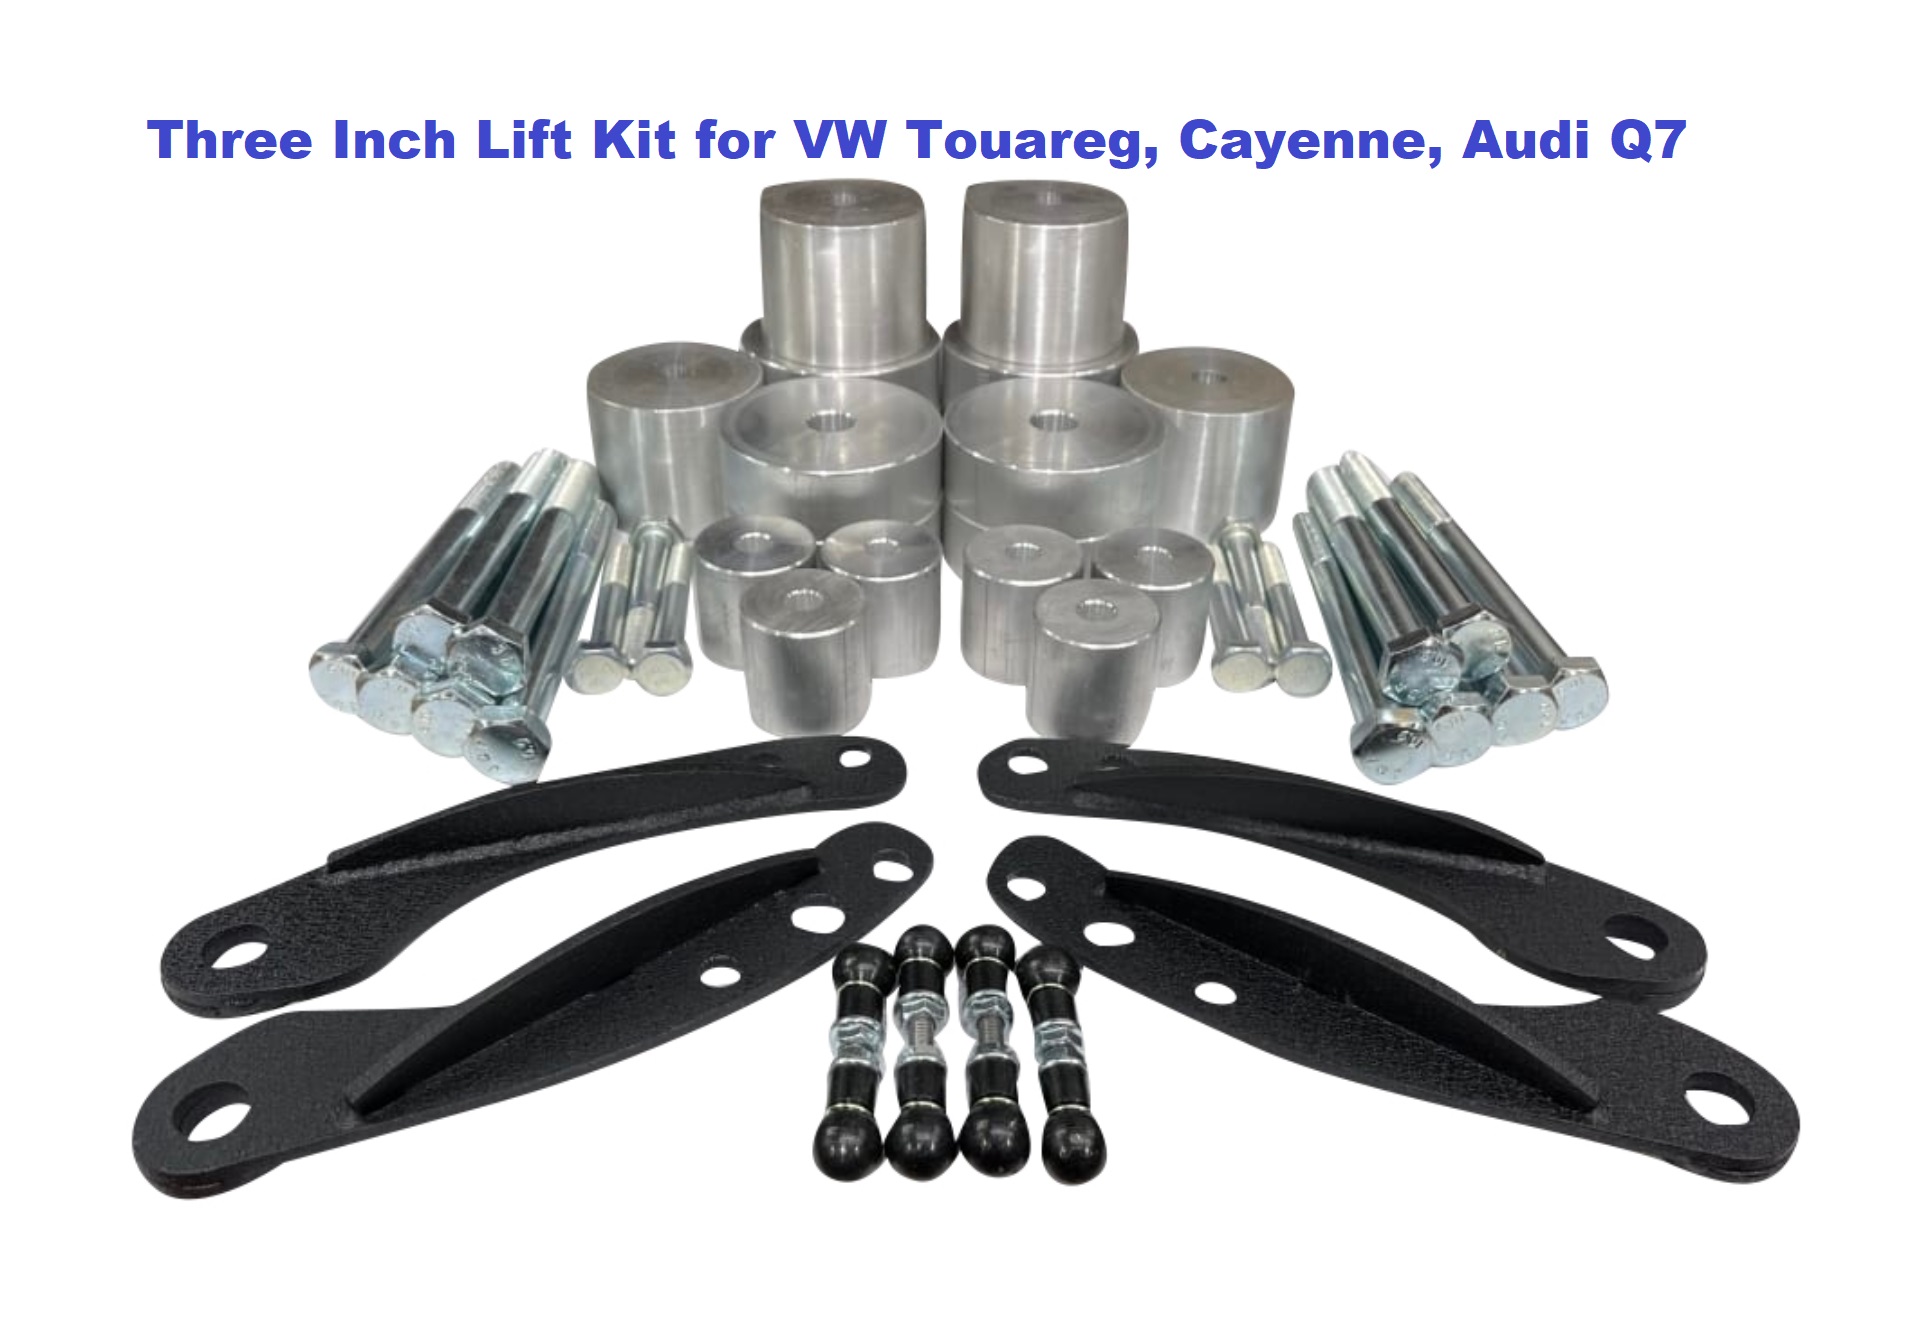 This Lift Kit works for all the VW Touareg, Porsche Cayenne, Audi Q7 with Air Suspensions. 